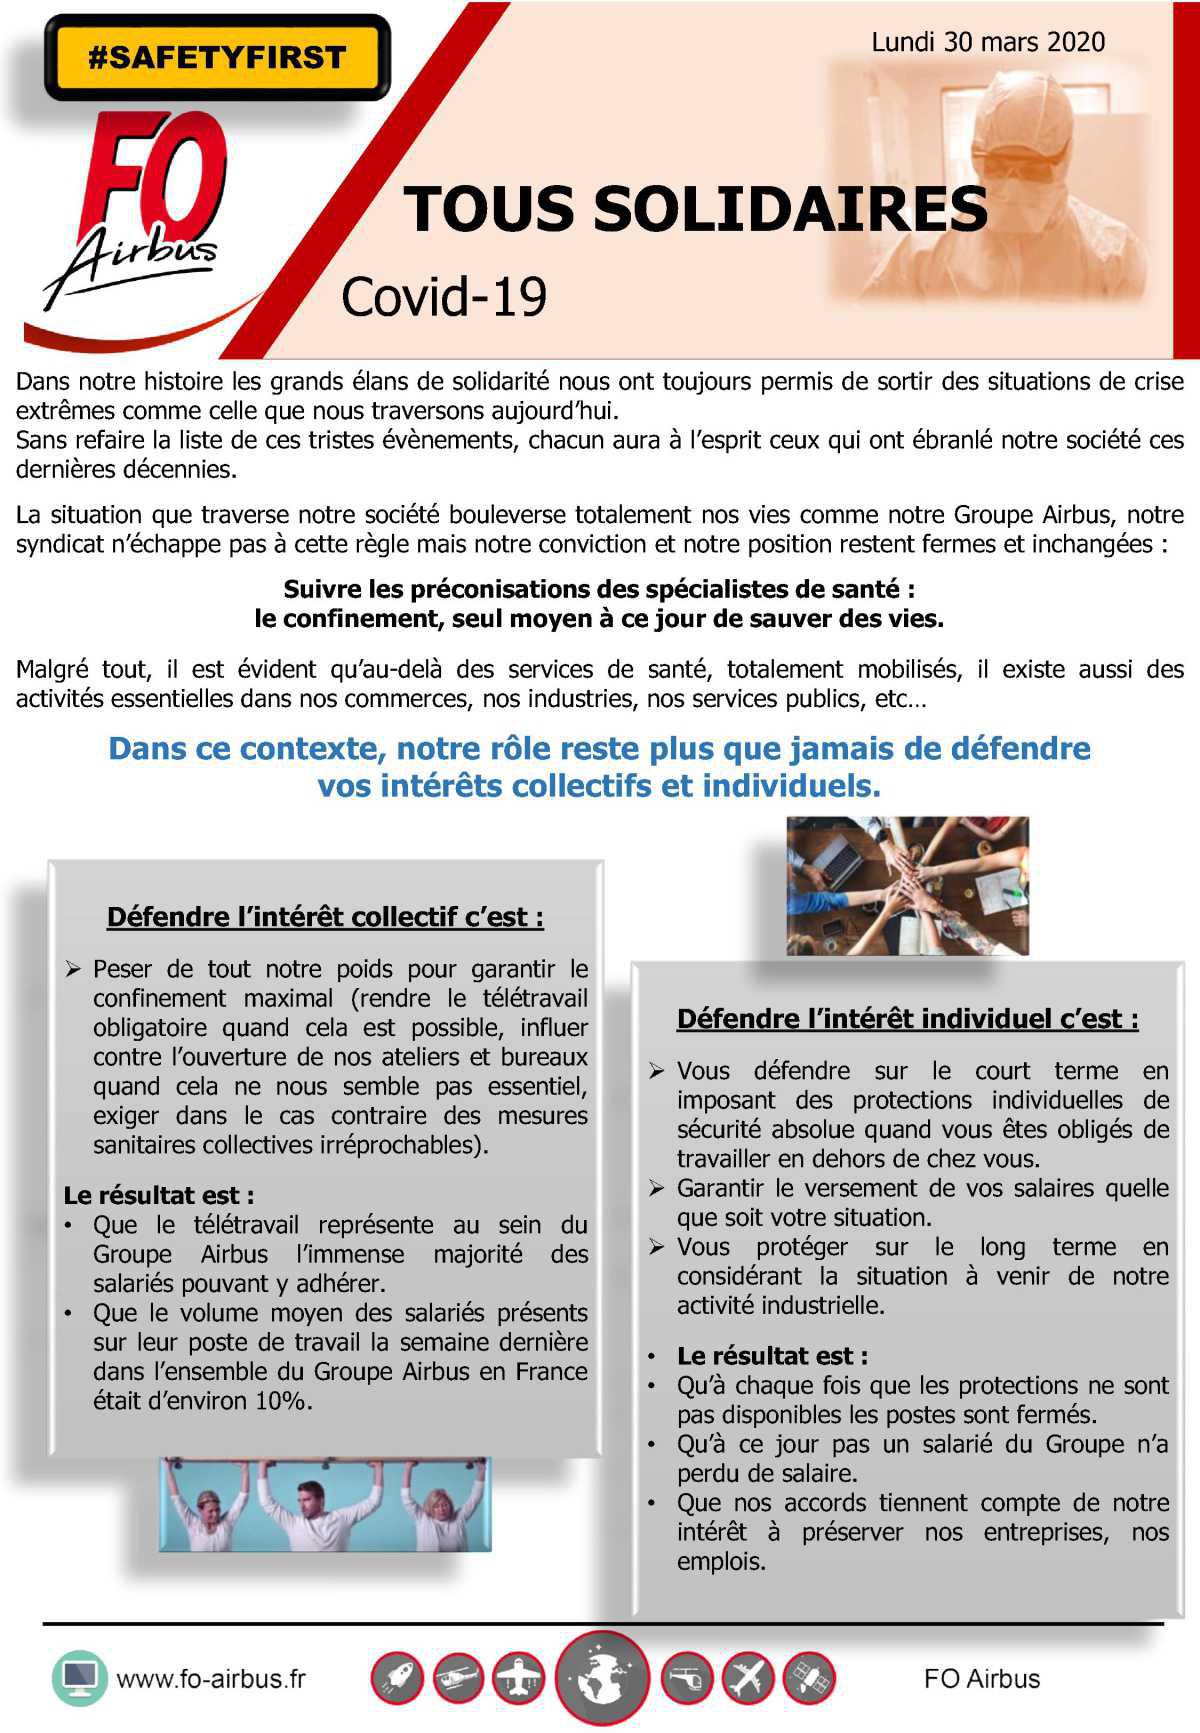 Covid-19 : TOUS SOLIDAIRES